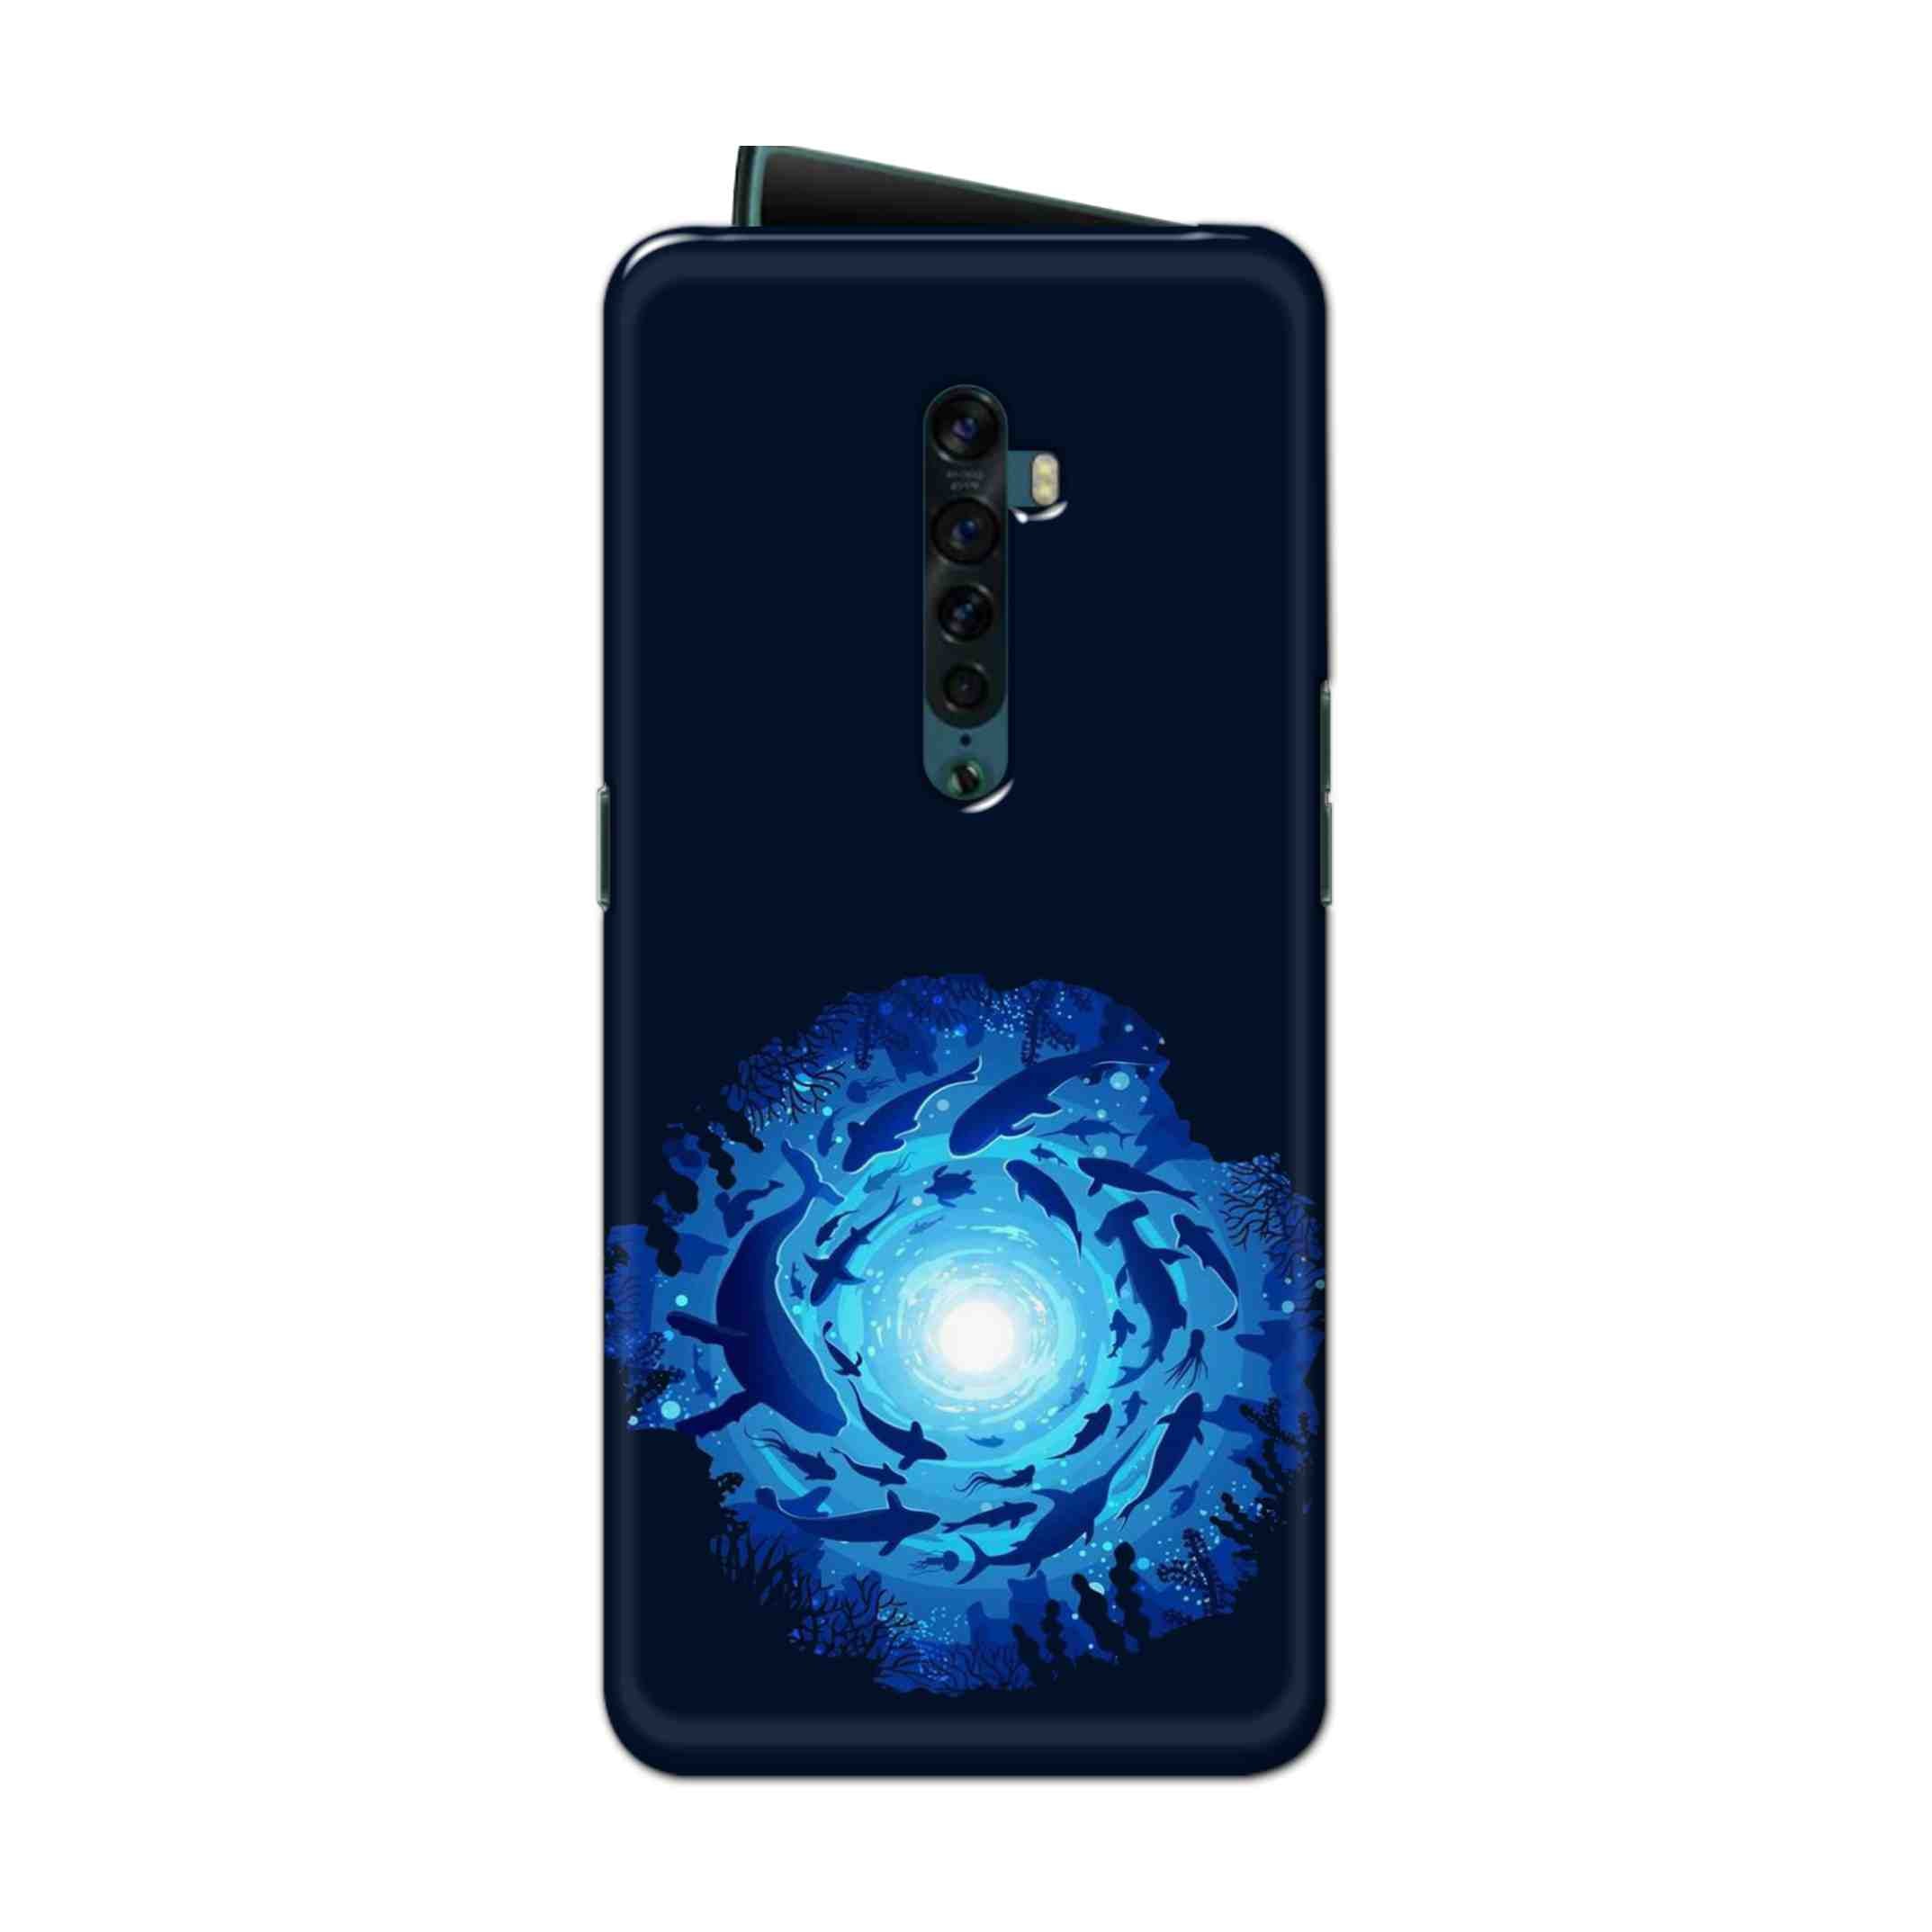 Buy Blue Whale Hard Back Mobile Phone Case Cover For Oppo Reno 2 Online